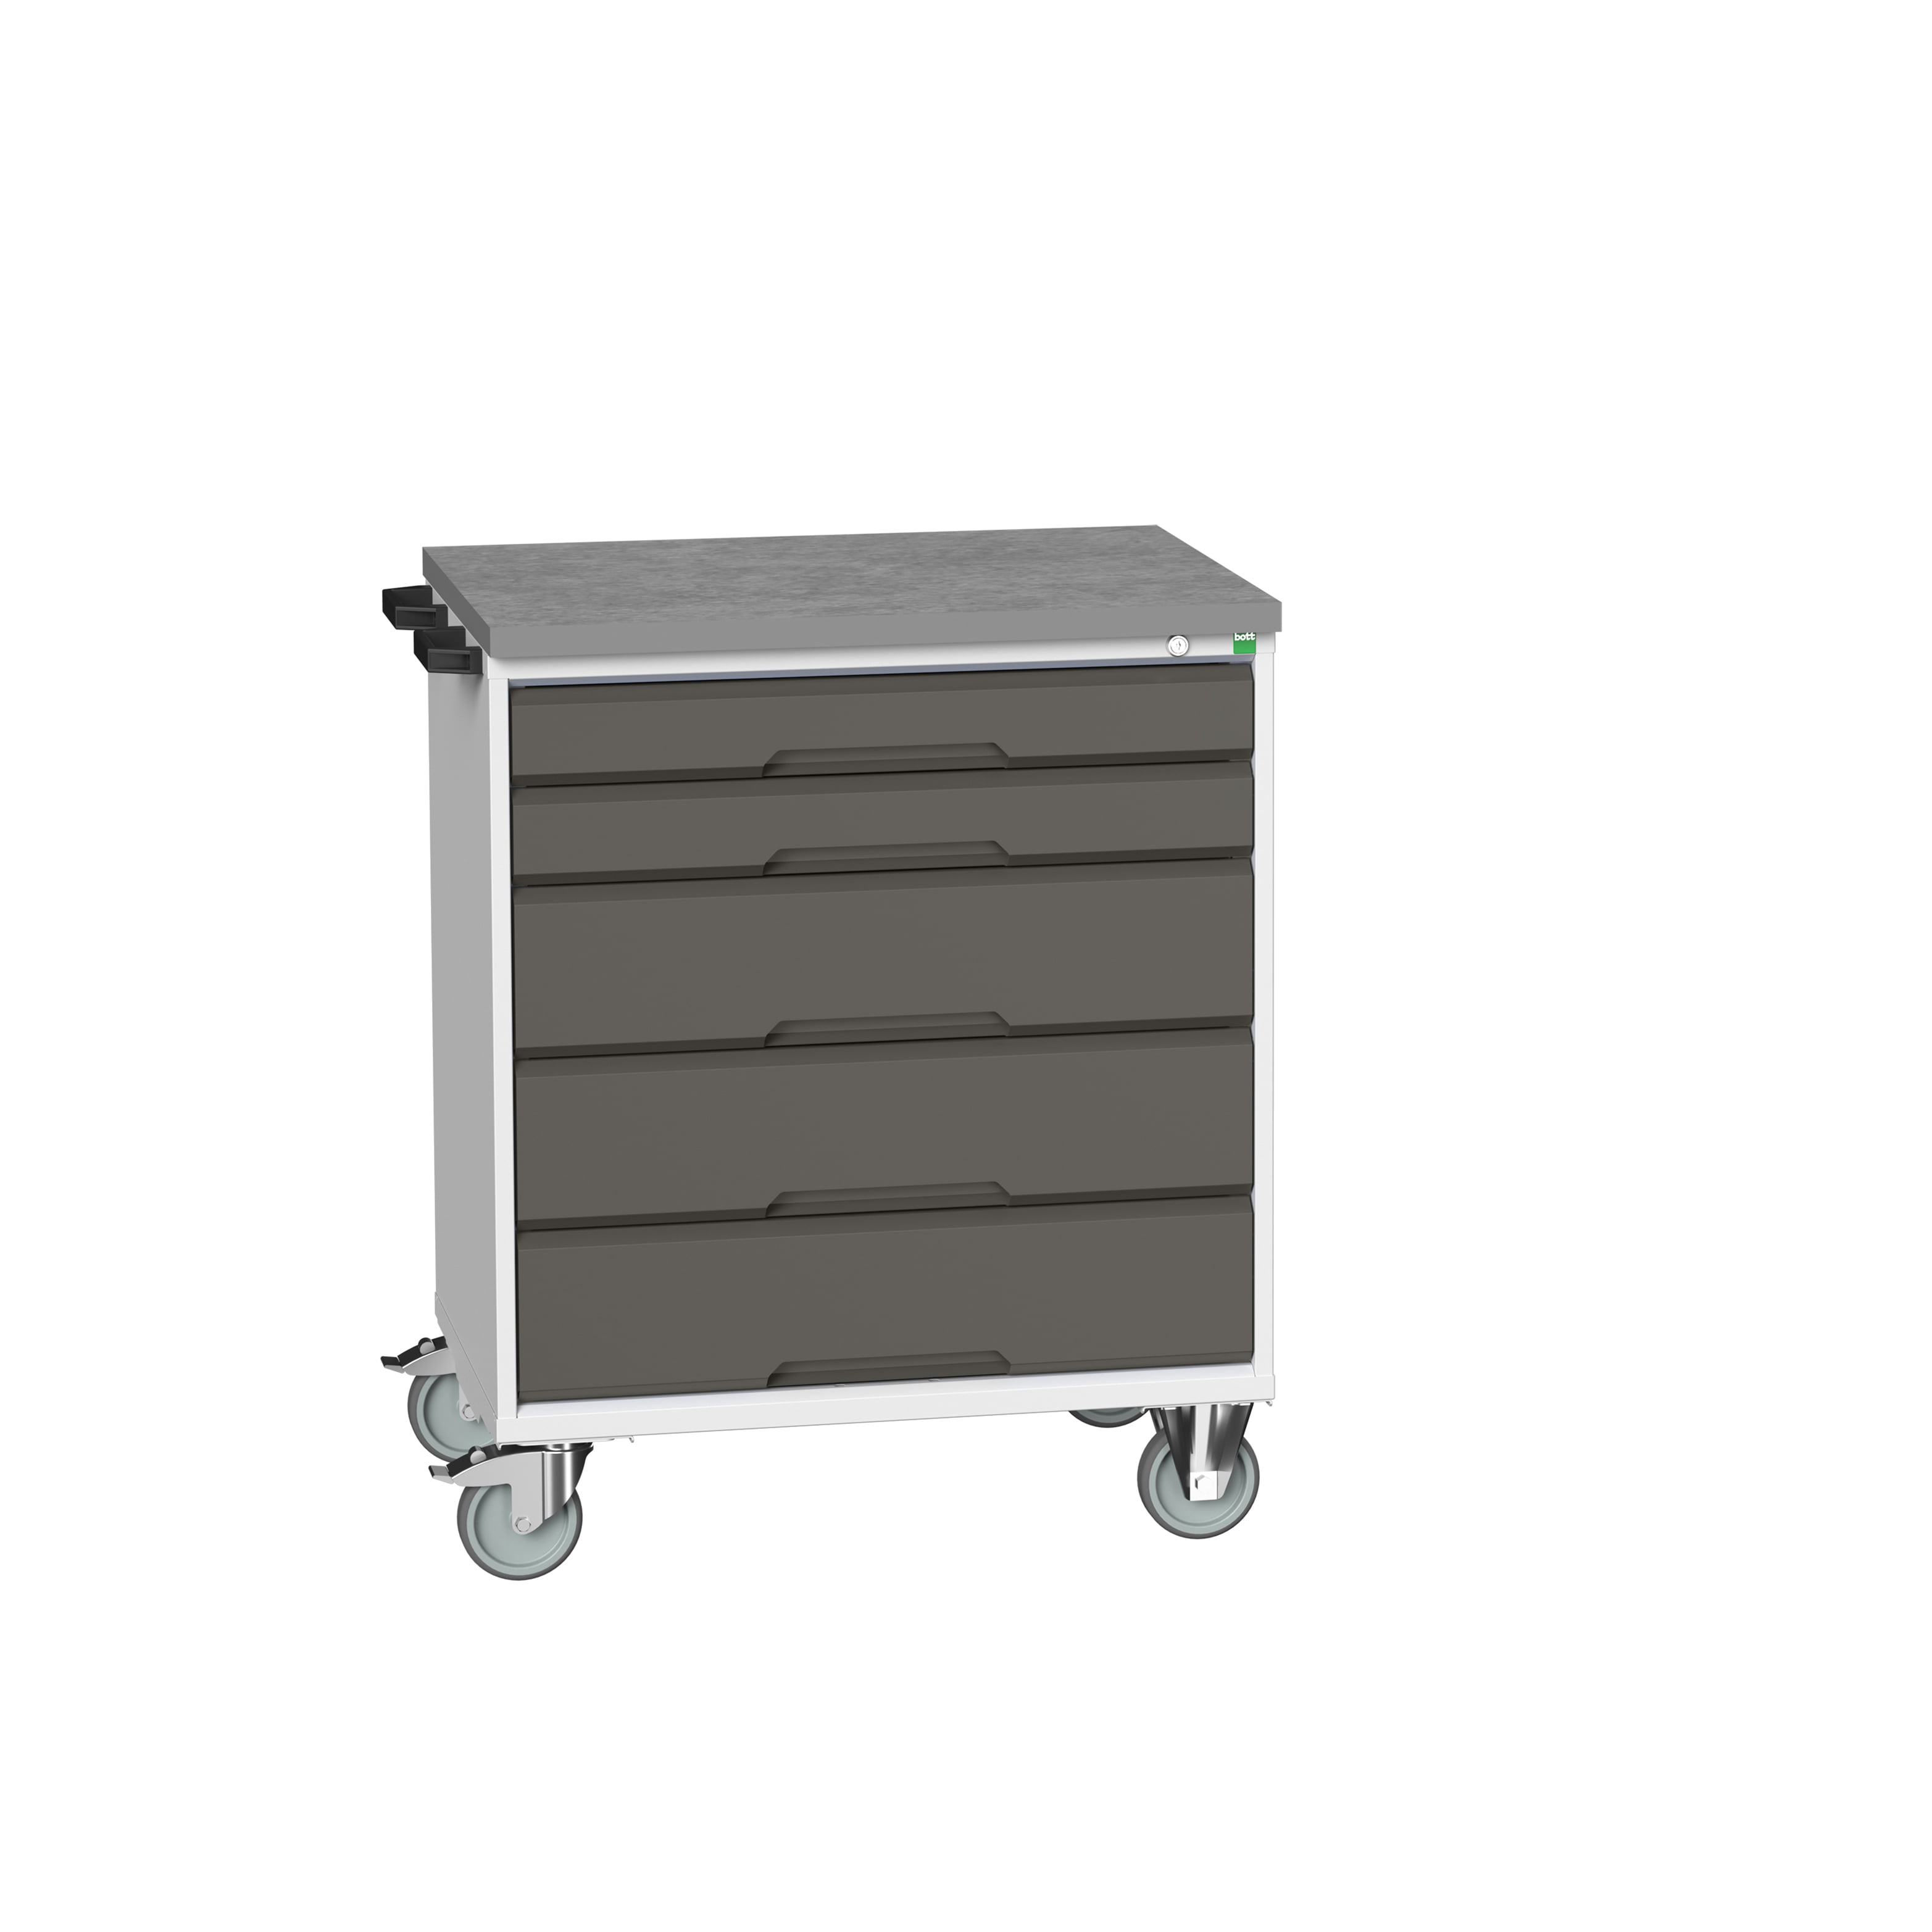 Moveable drawer unit in Anthracite Grey